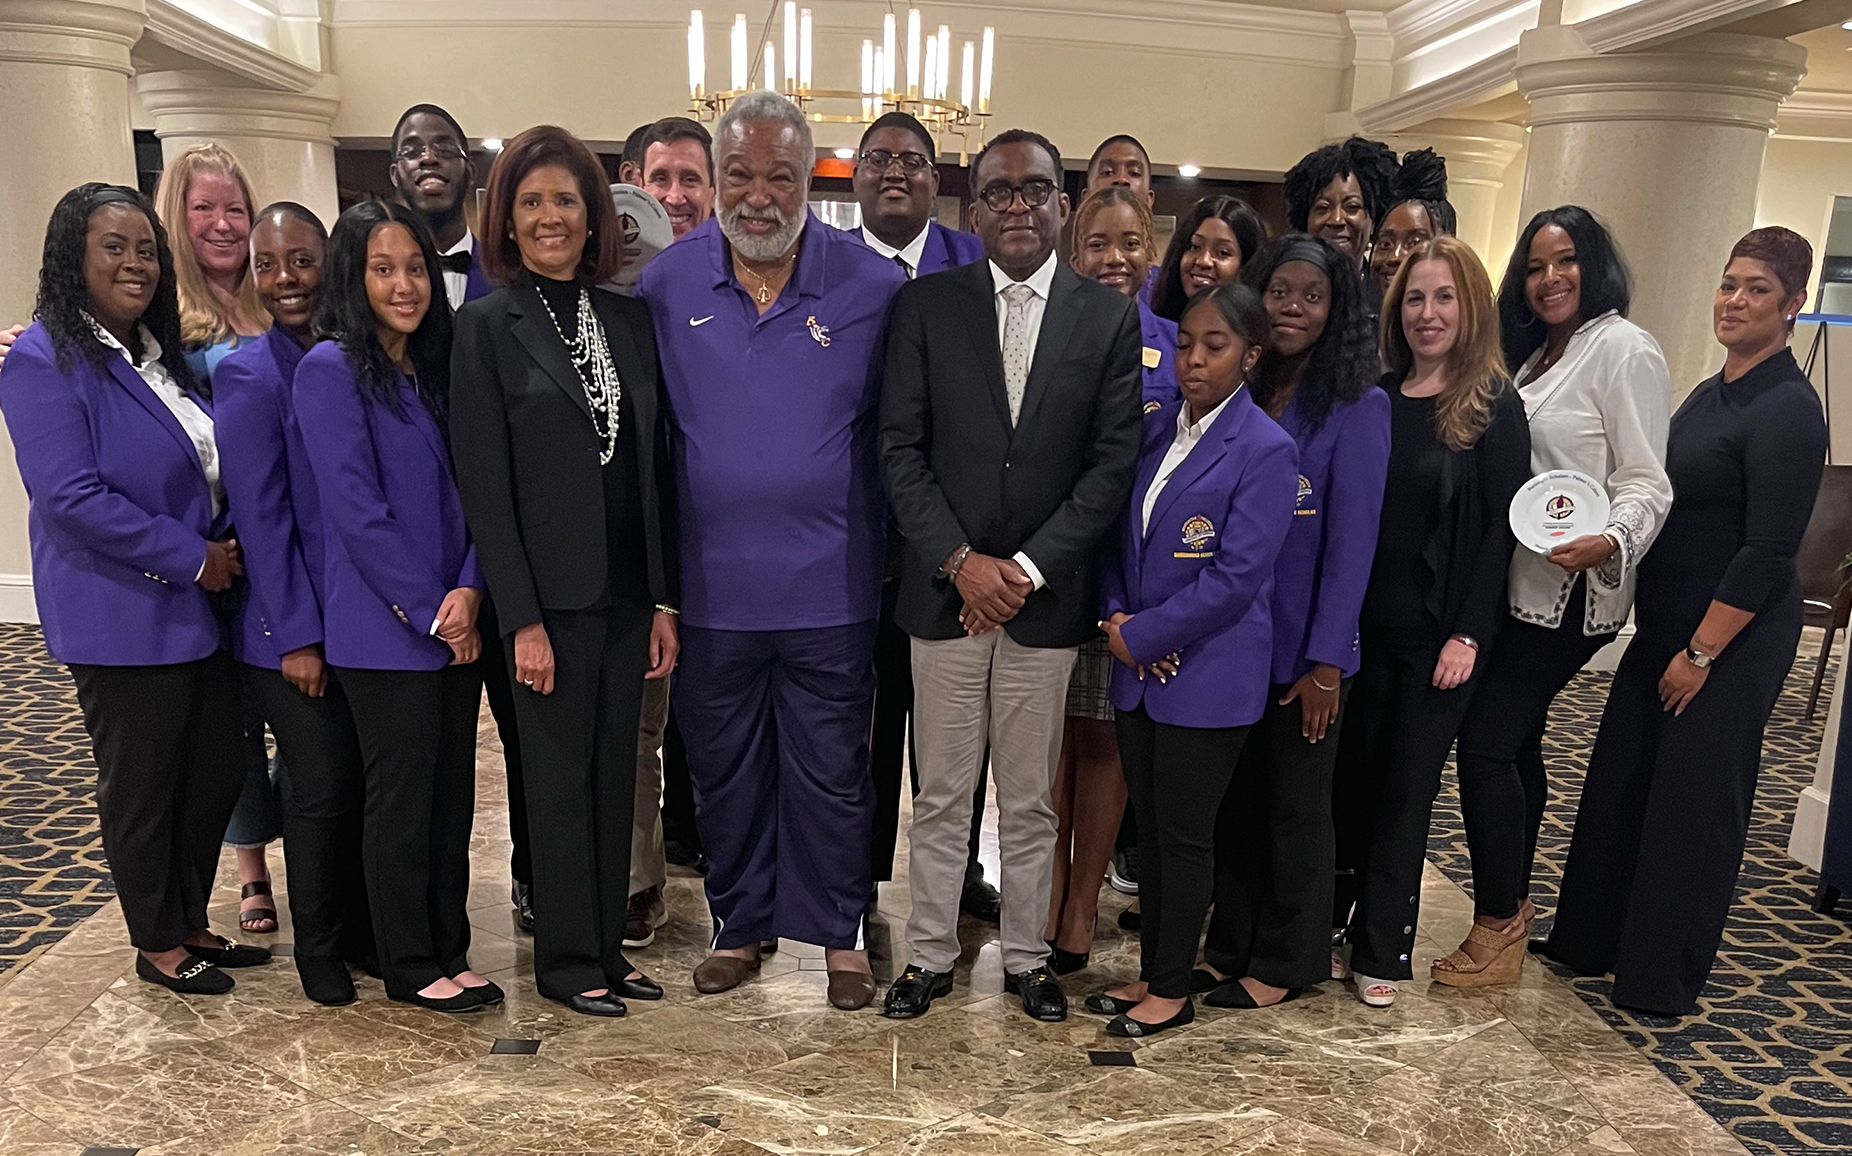 Benedict College Palmer's Scholars and executives